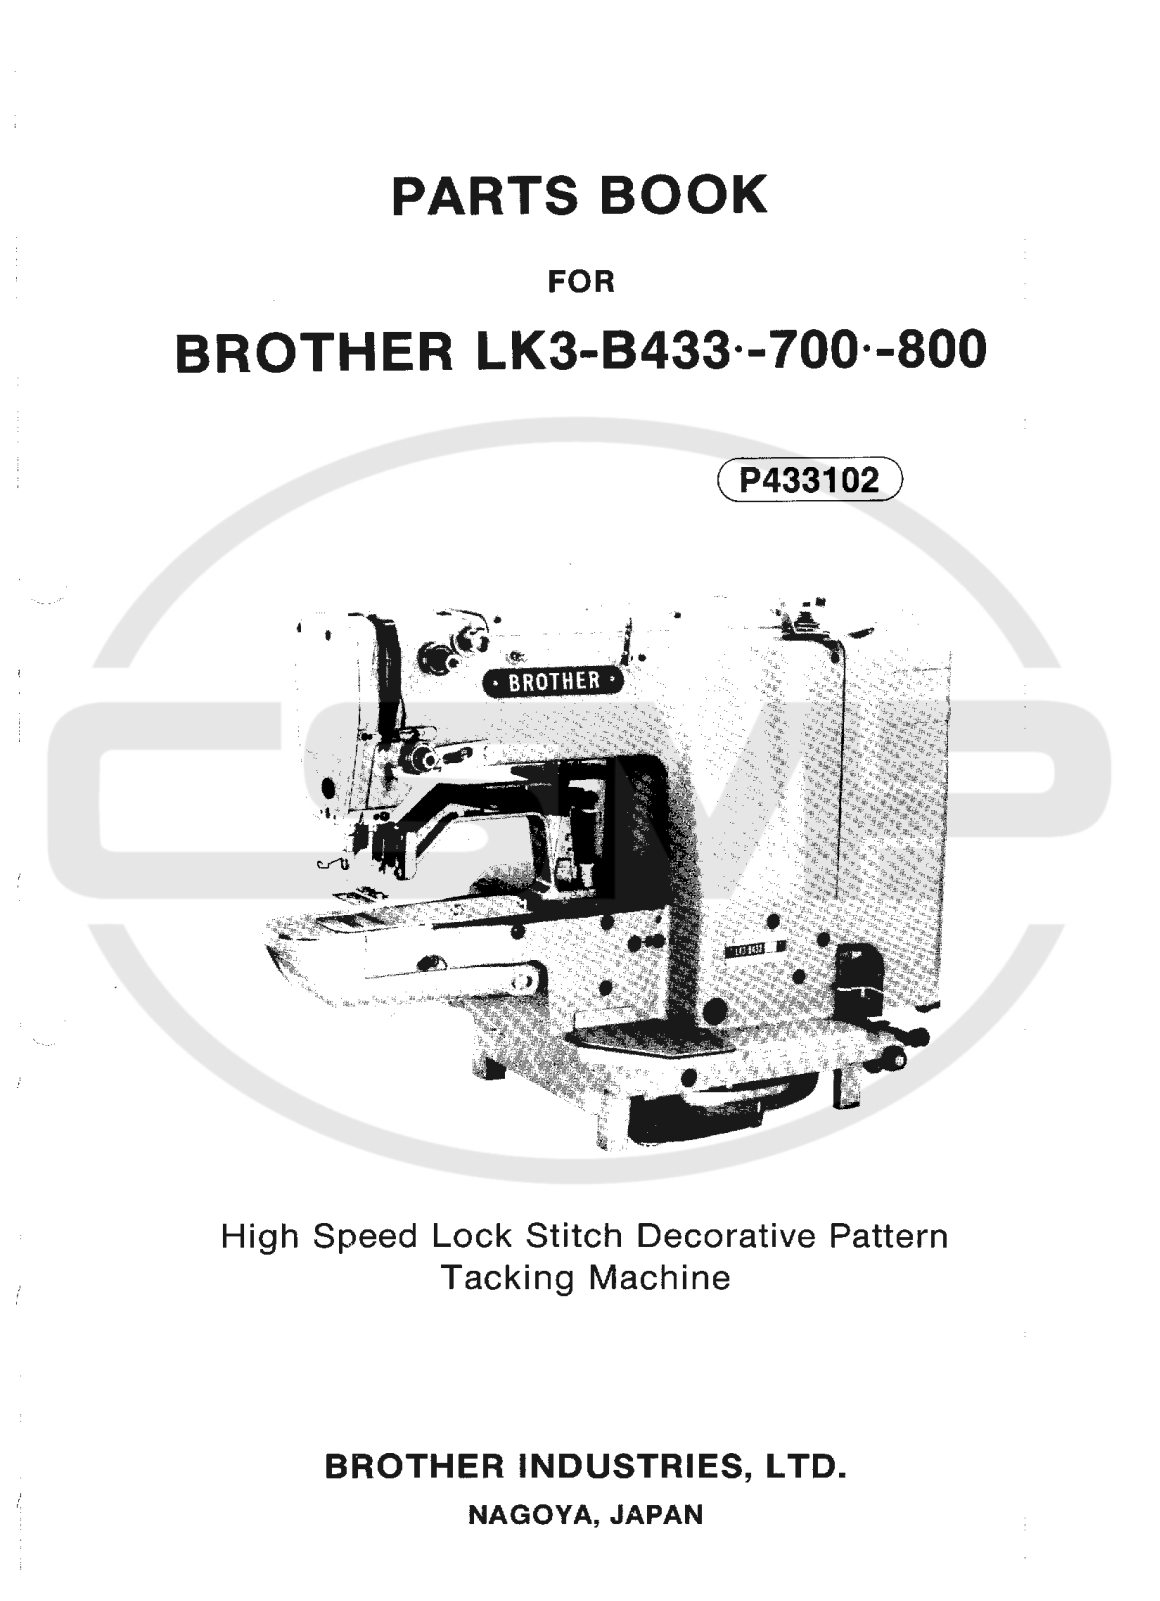 Brother LK3 B700 Parts Book